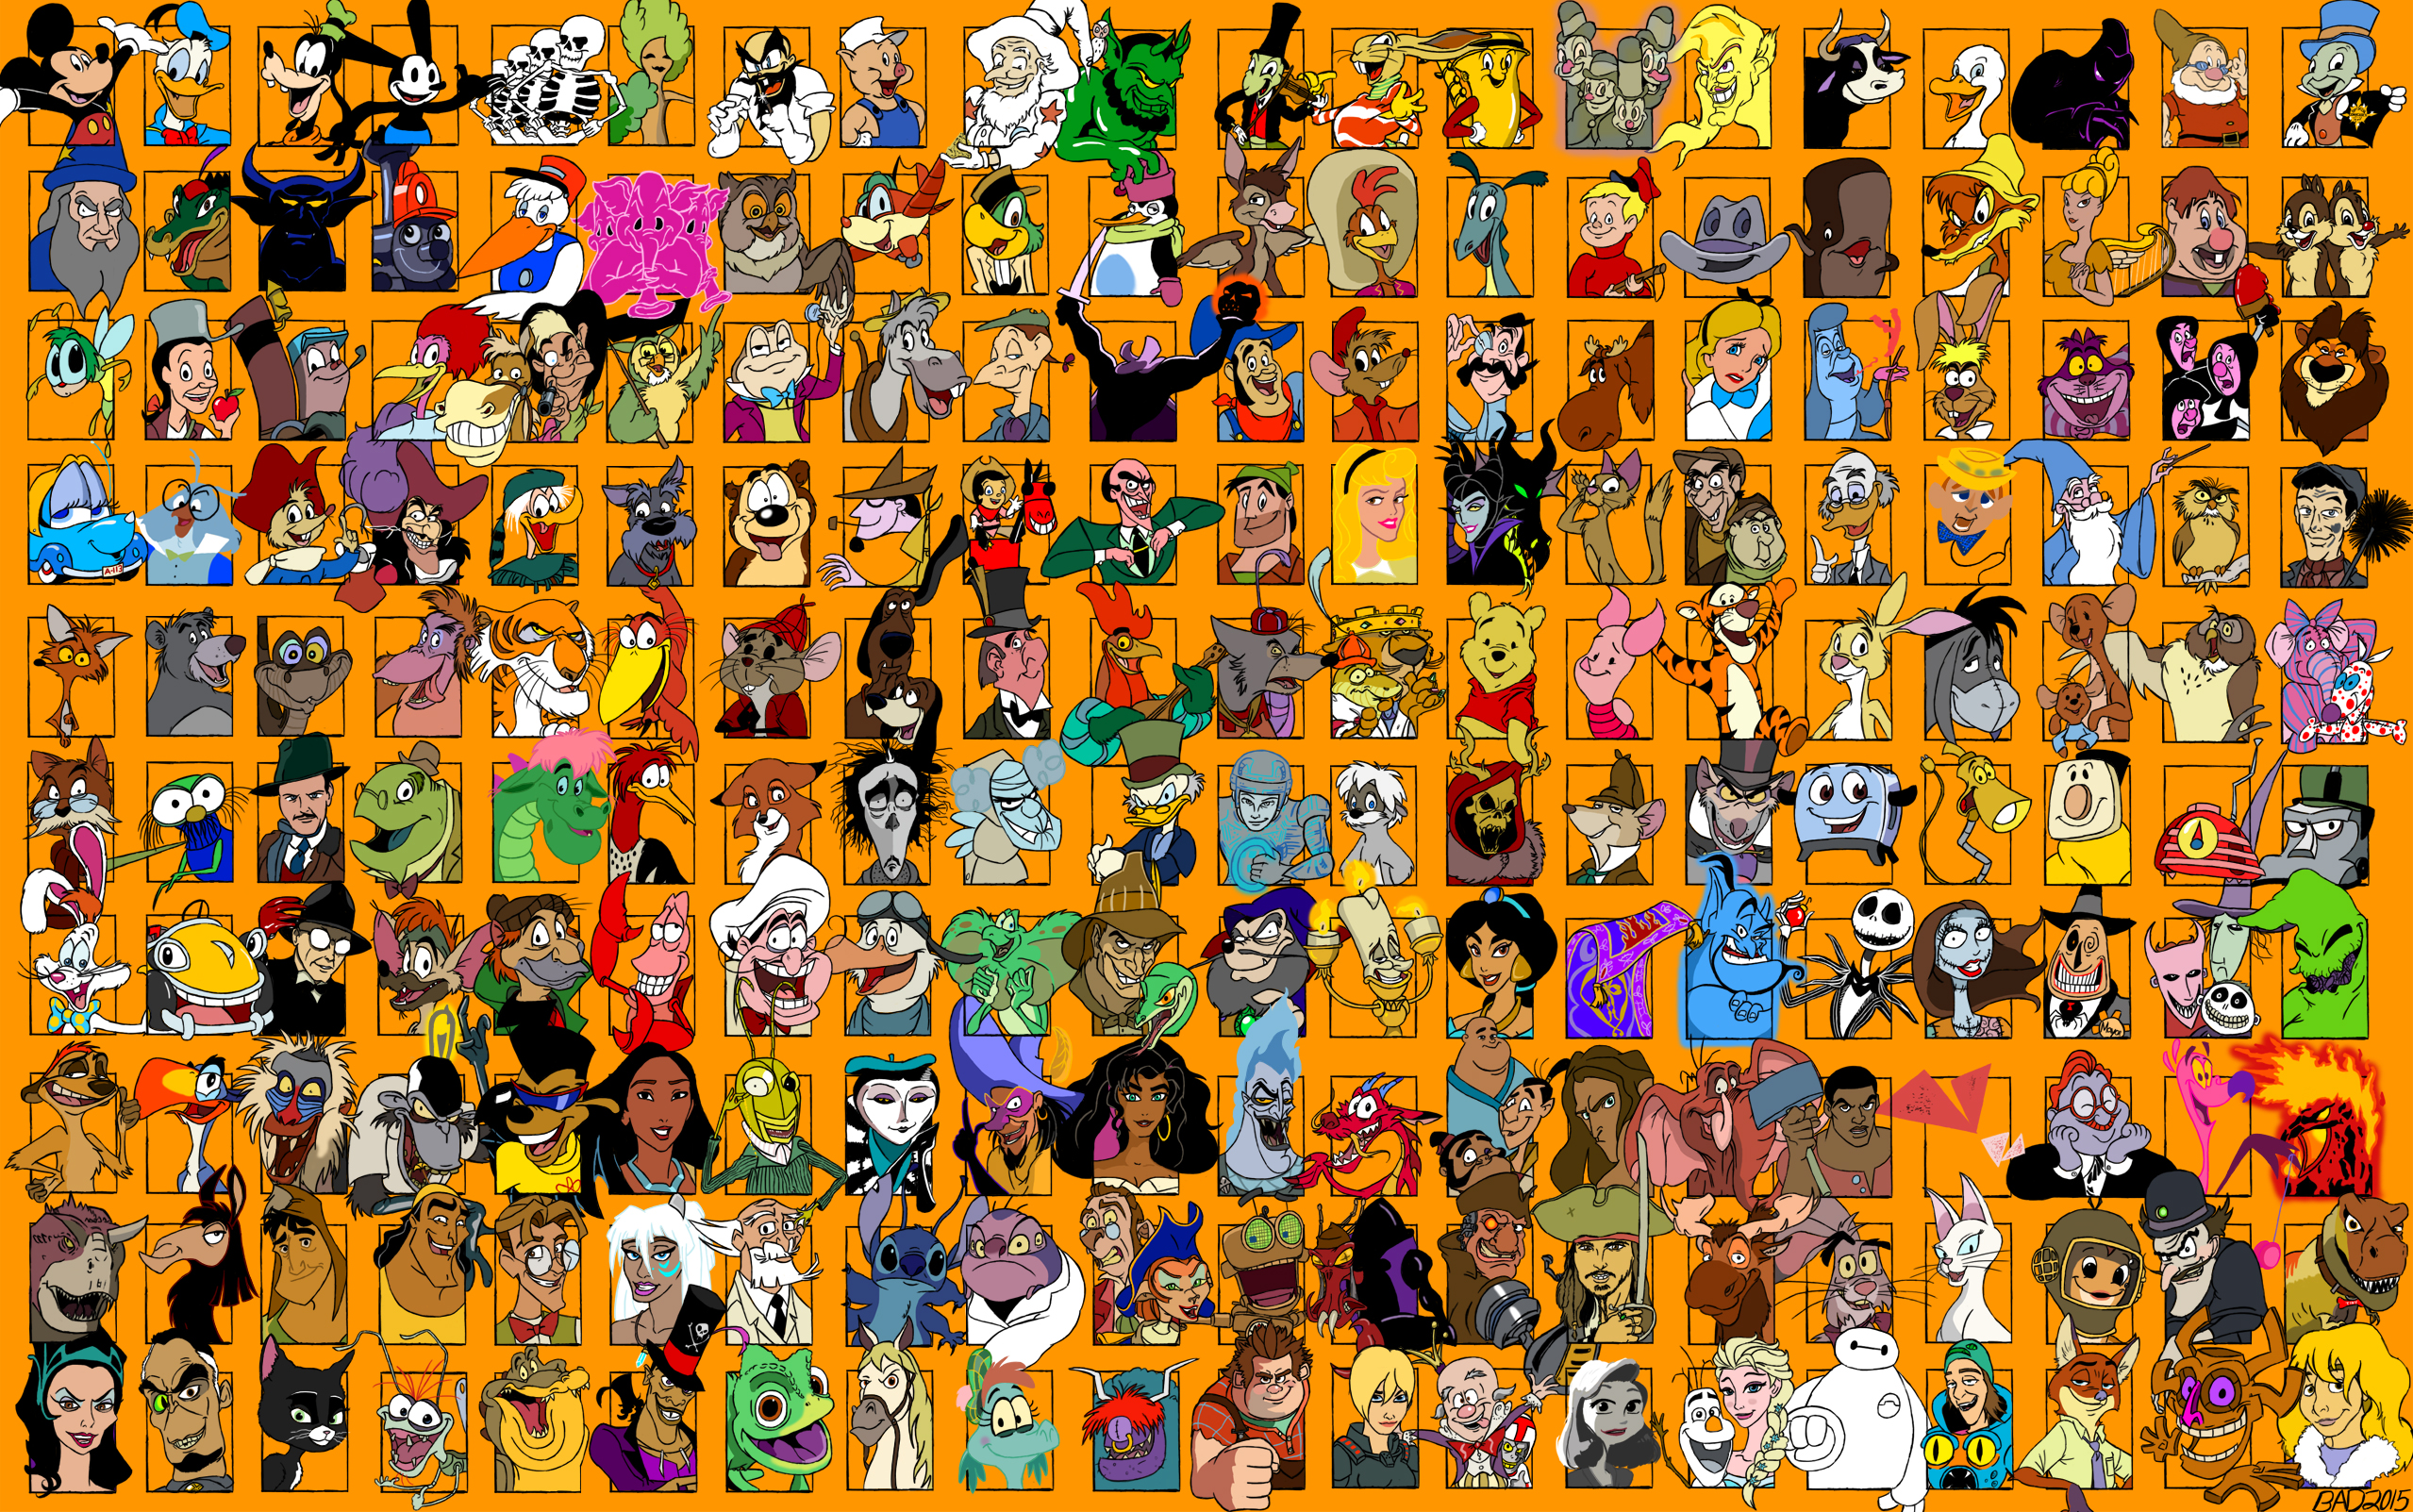 Brad Dotson's 200 Favorite Disney Characters by TheZoologist on DeviantArt